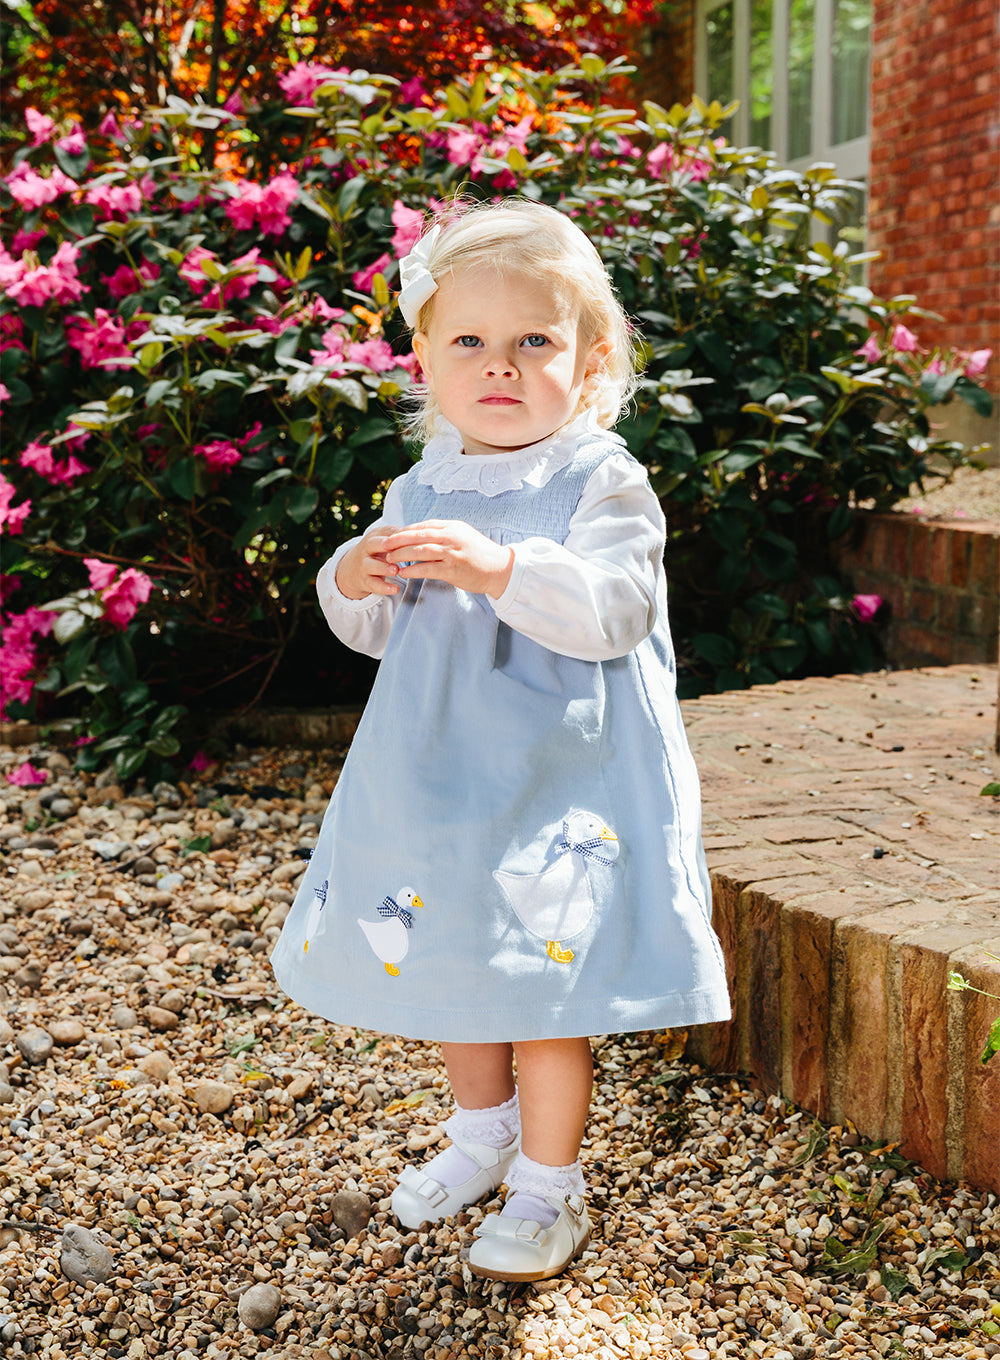 Little Duck Smocked Pinafore in Pale Blue